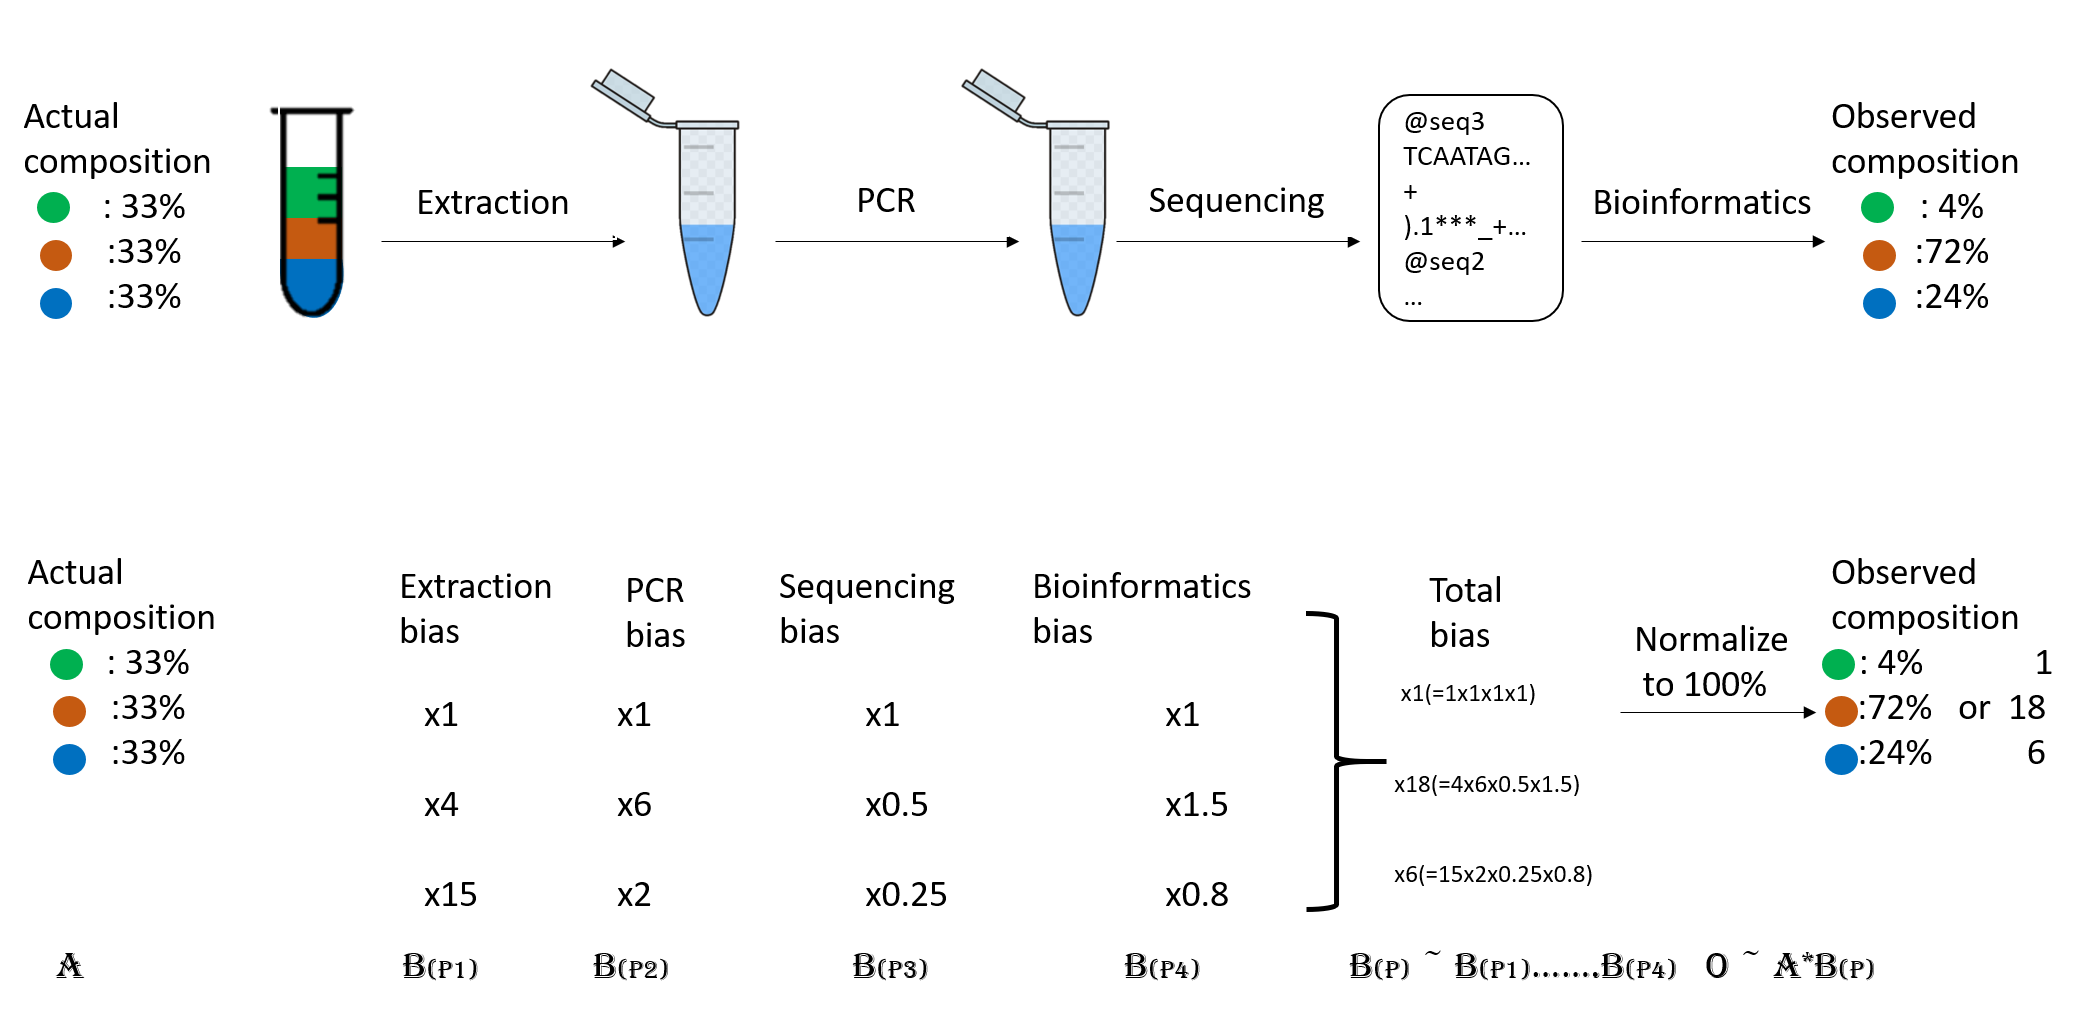 Flow diagram that shows how the initial composition of 33% for each of the three taxa in the sample ends up being 4%, 72%, and 24% after the biases imposed by the extraction, PCR, sequencing and bioinformatics steps.